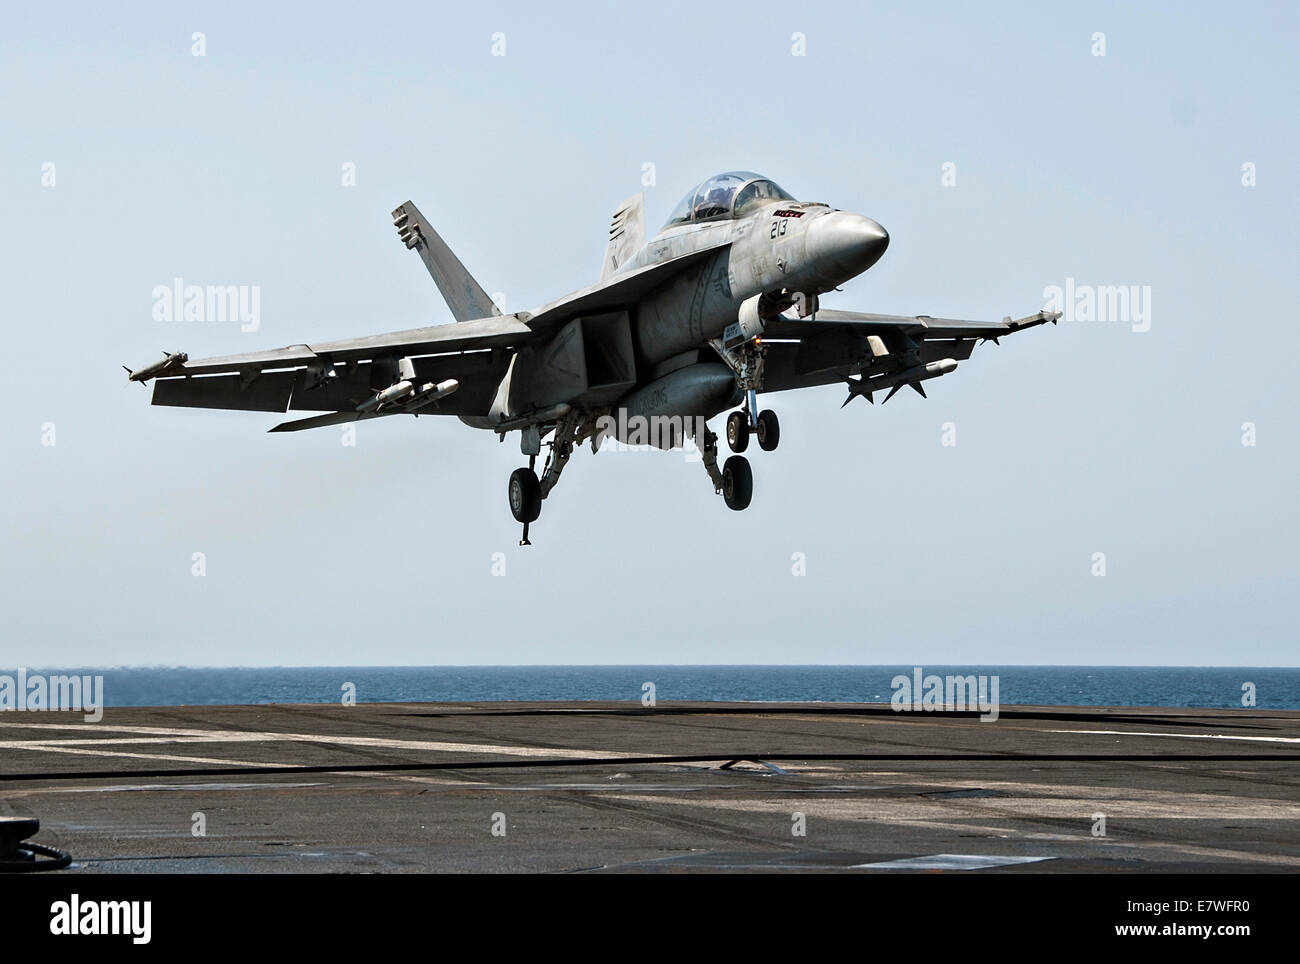 A US Navy F/A-18F Super Hornet fighter aircraft lands on the flight deck of the aircraft carrier USS George H.W. Bush after returning from a combat sortie against ISIS targets September 23, 2014 in the Persian Gulf. The military launched the first direct strikes on ISIS targets inside Syria. Stock Photo